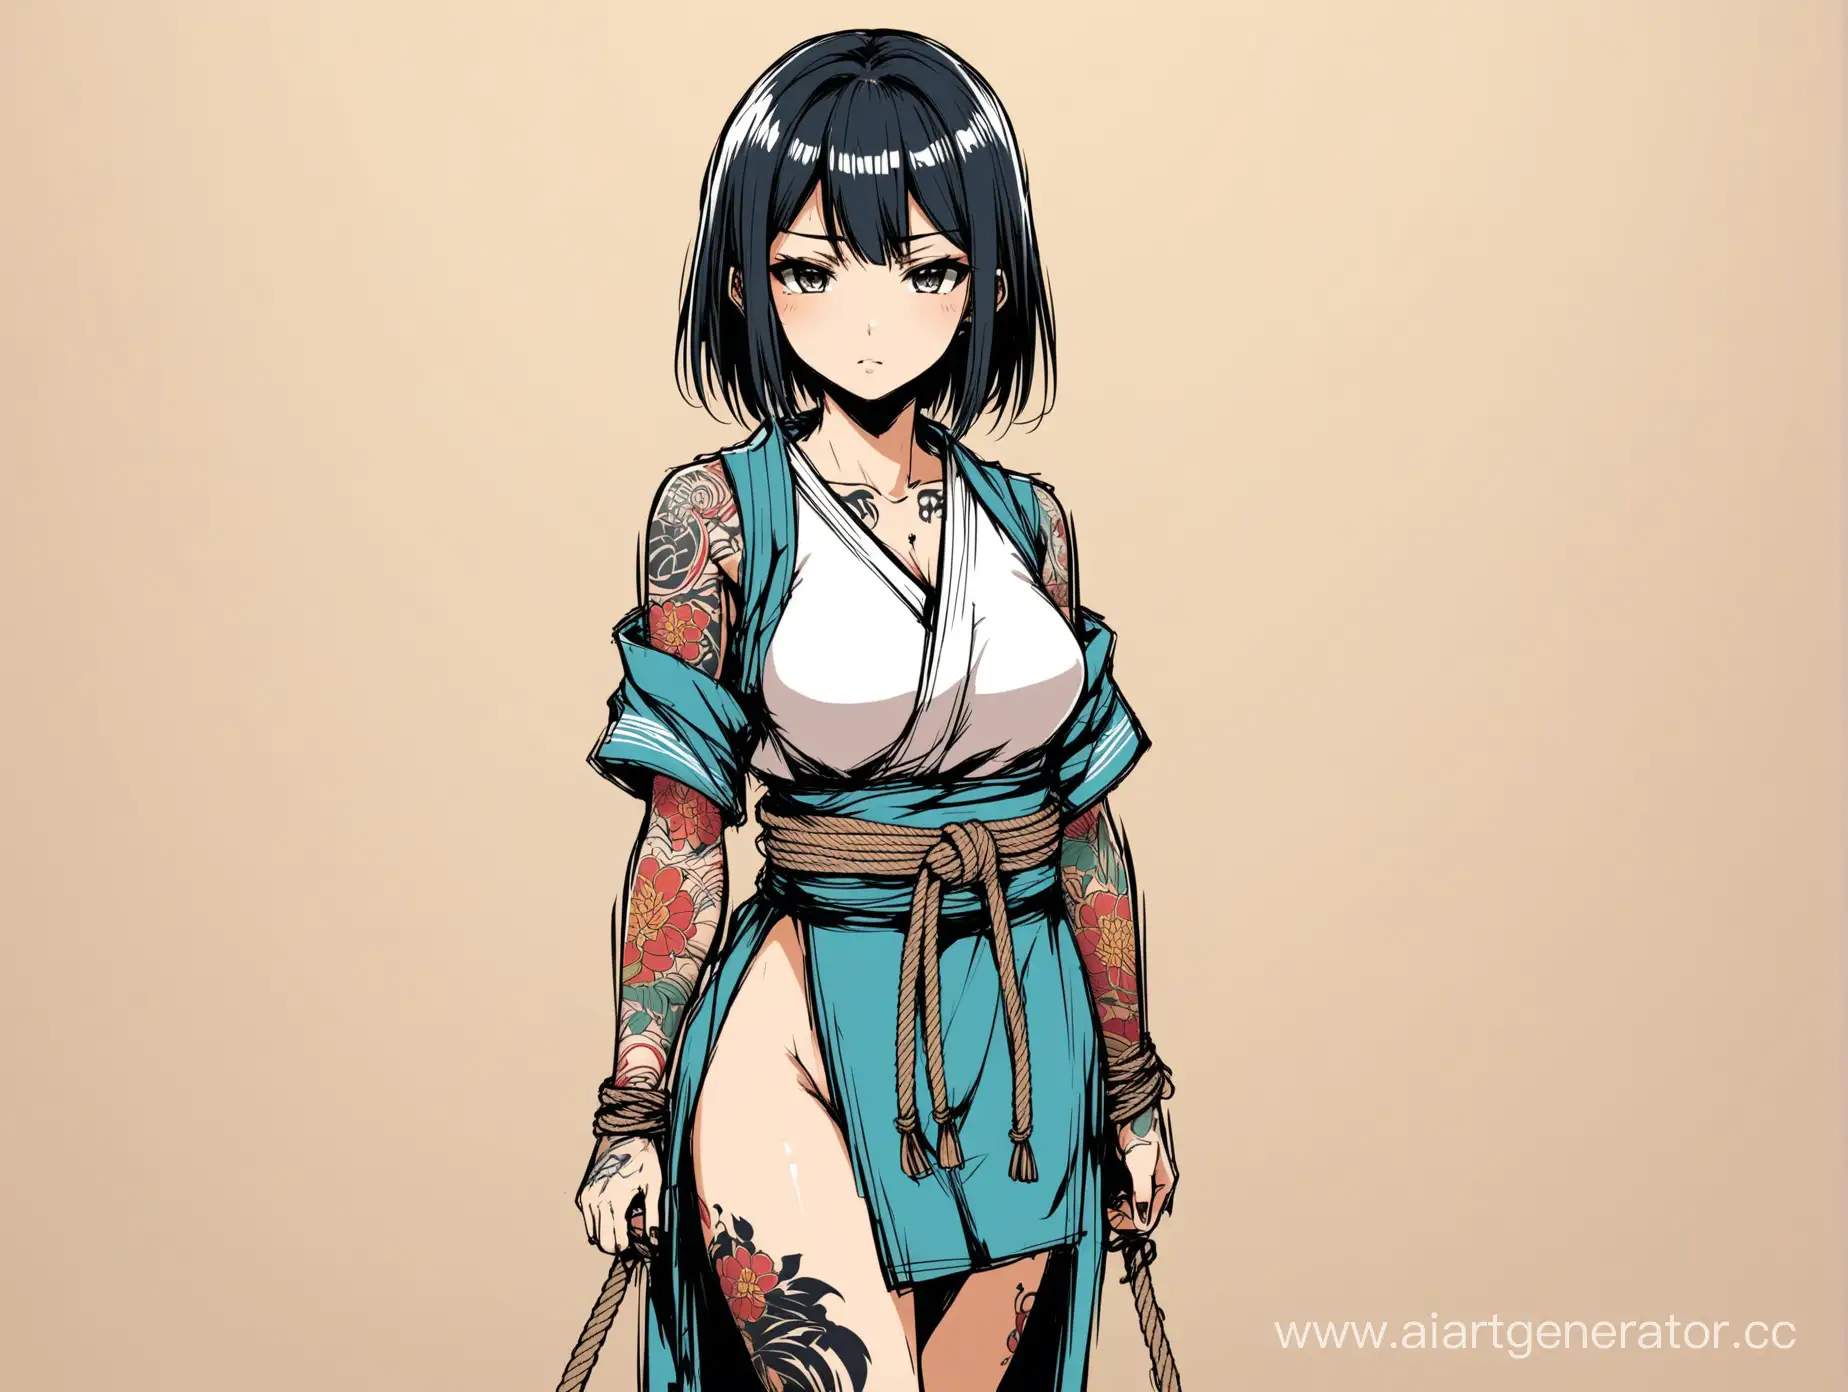 Anime-Style-Illustration-Japanese-Girl-with-Tattoo-and-Ropes-in-4K-Detail